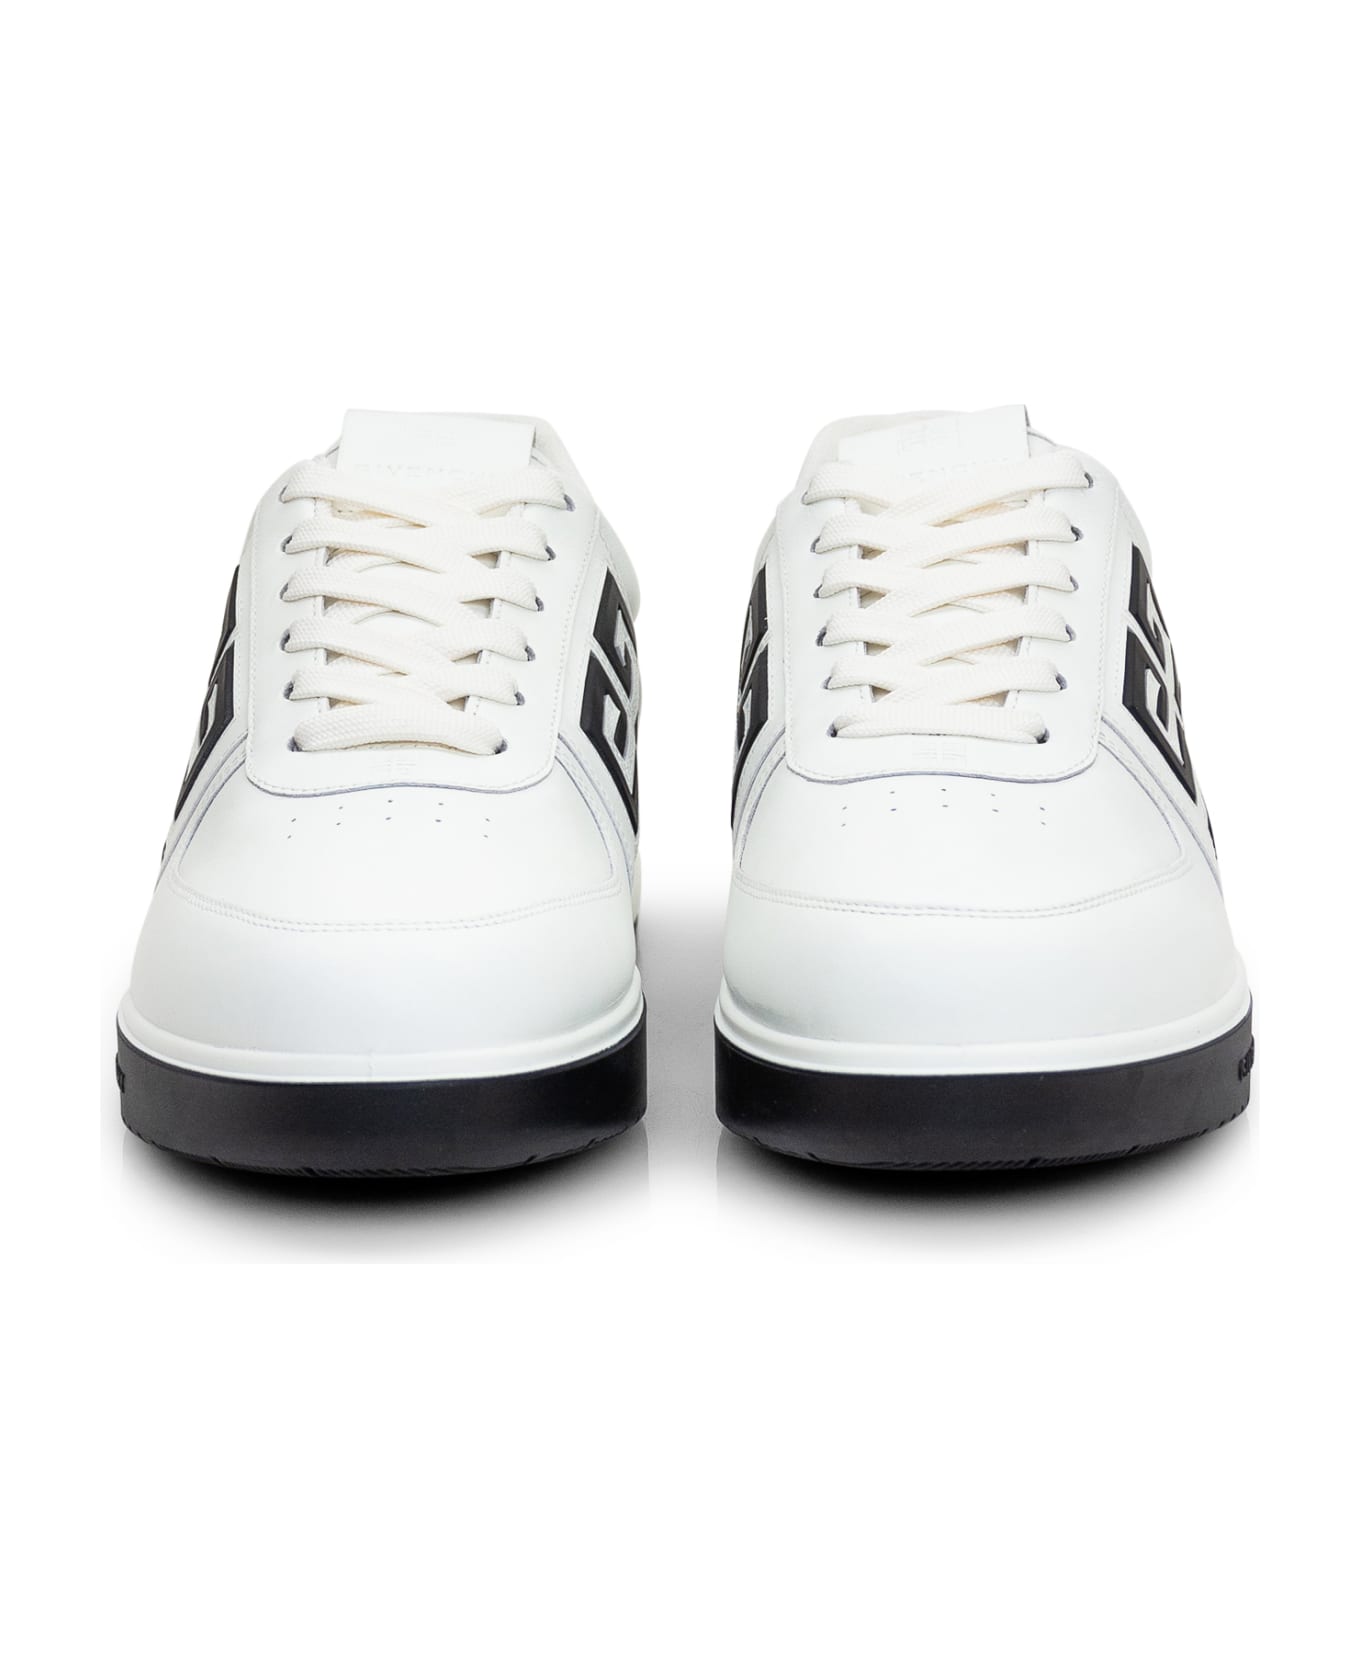 Givenchy White G4 Low Sneakers - White